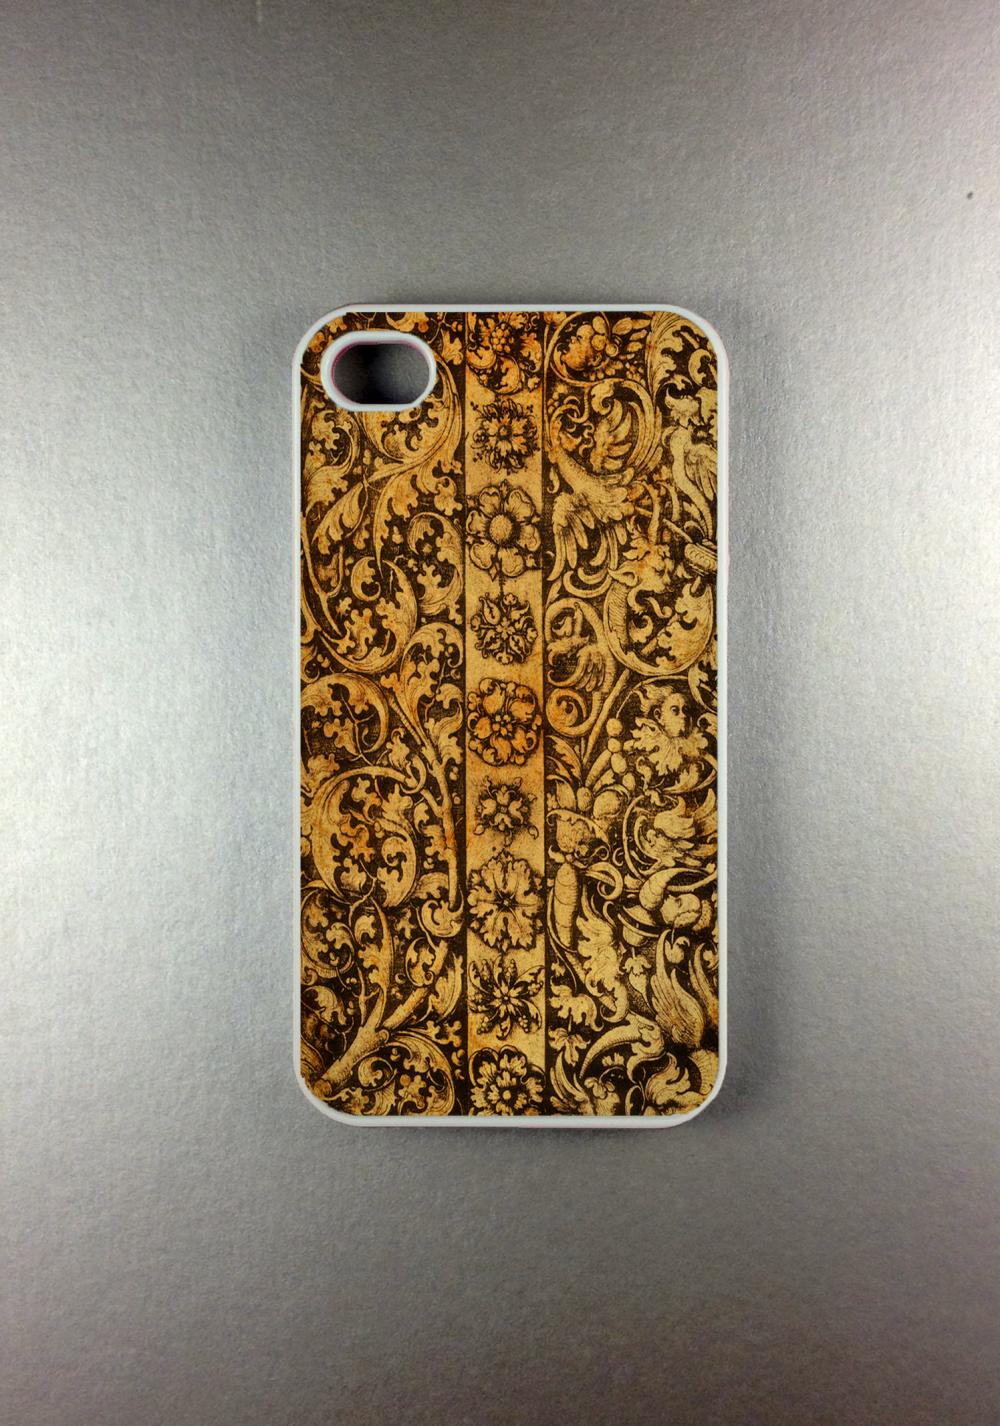 Iphone 4 Case - Carved Wood Iphone 4s Case, Iphone Case, Iphone 4 Cover